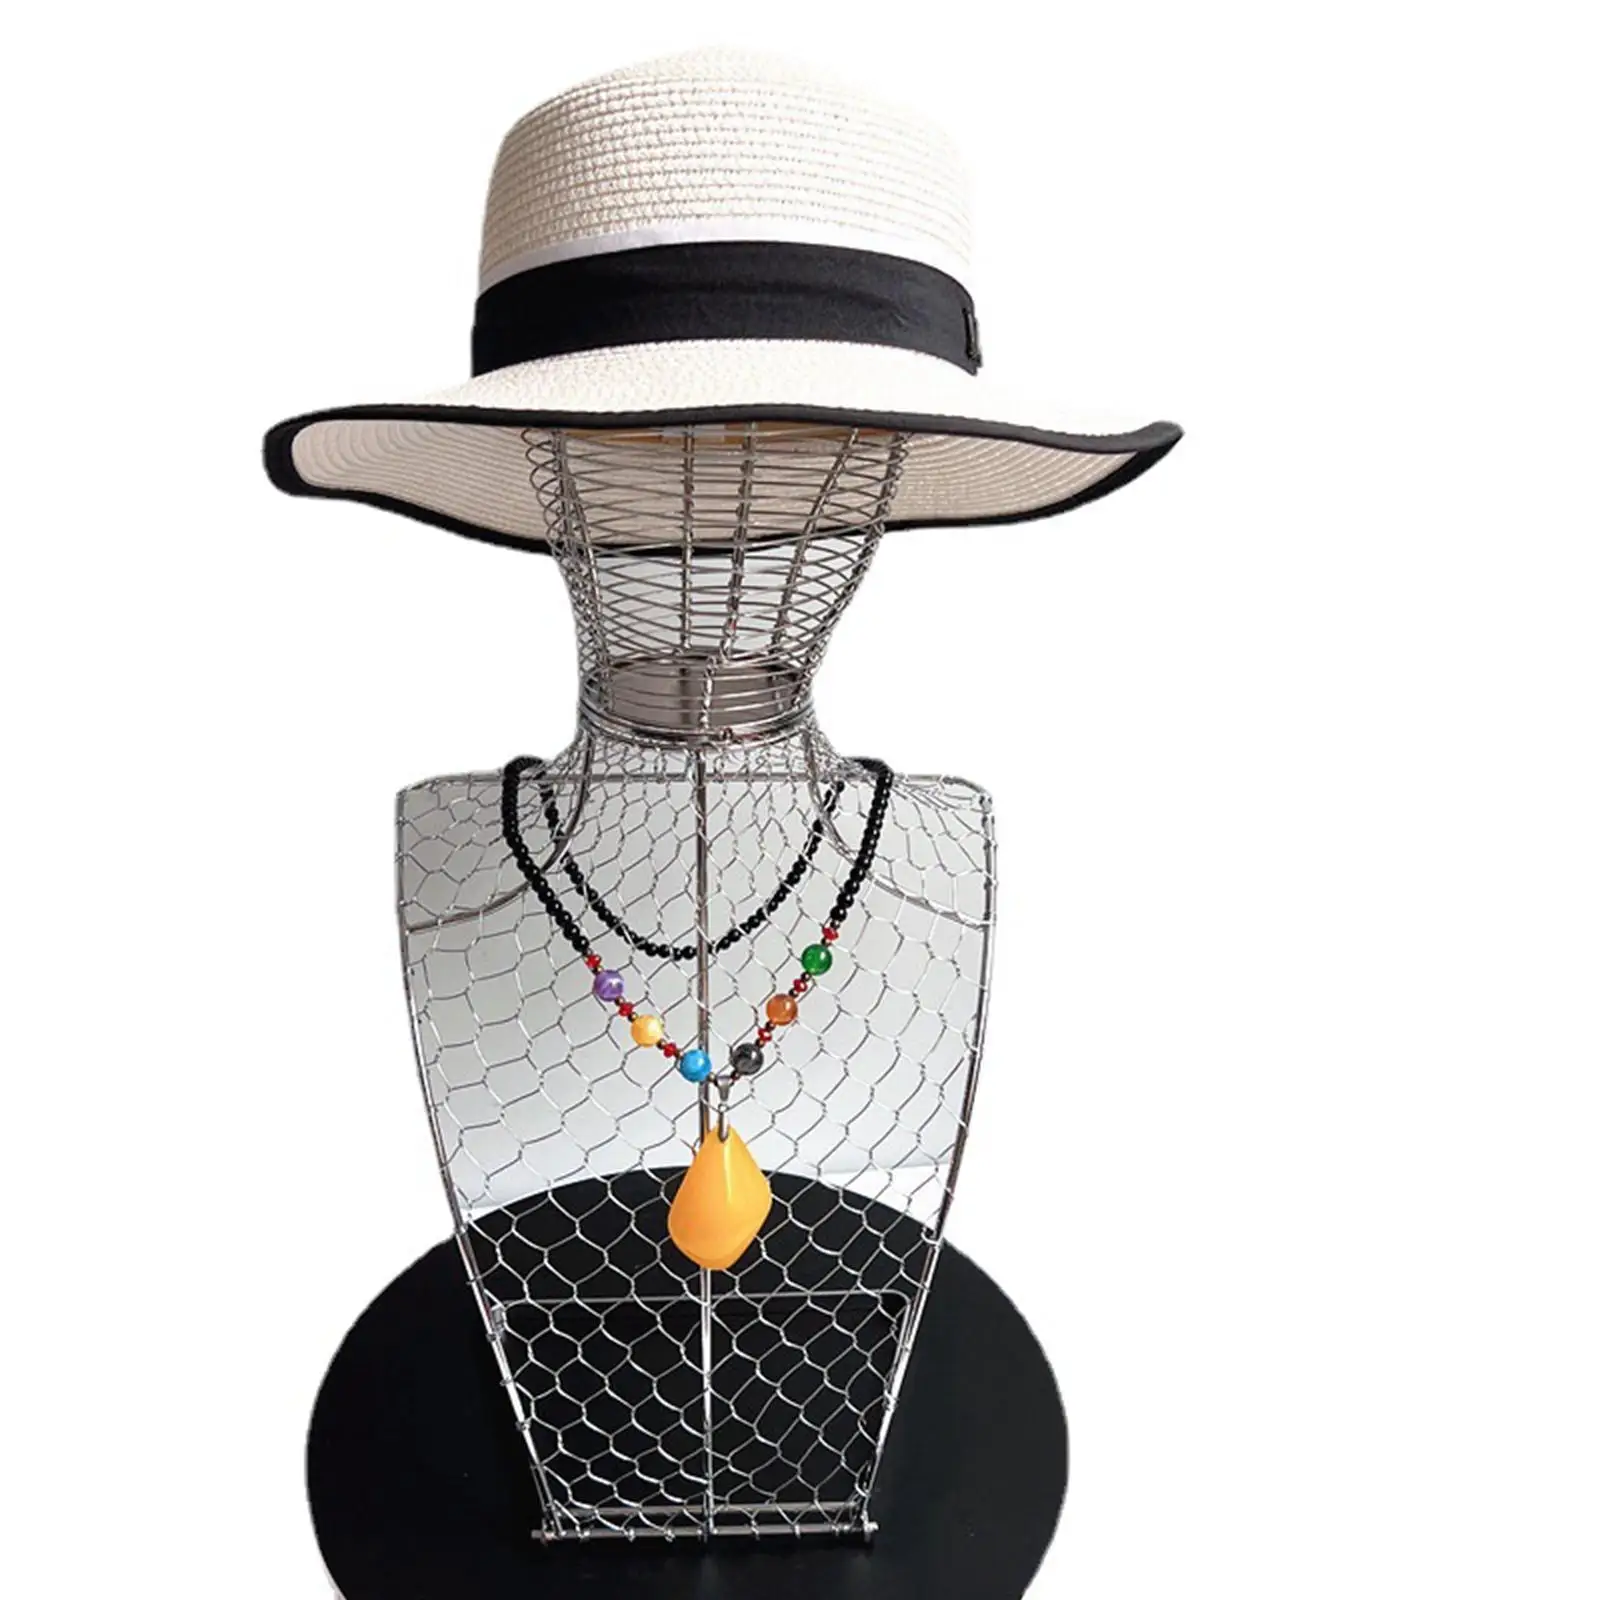 Necklace Display Stand Mannequin Bust Sturdy Pendant Chain Organizer 53cm for Home Decoration Desktop Jewelry Shop Shopping Mall